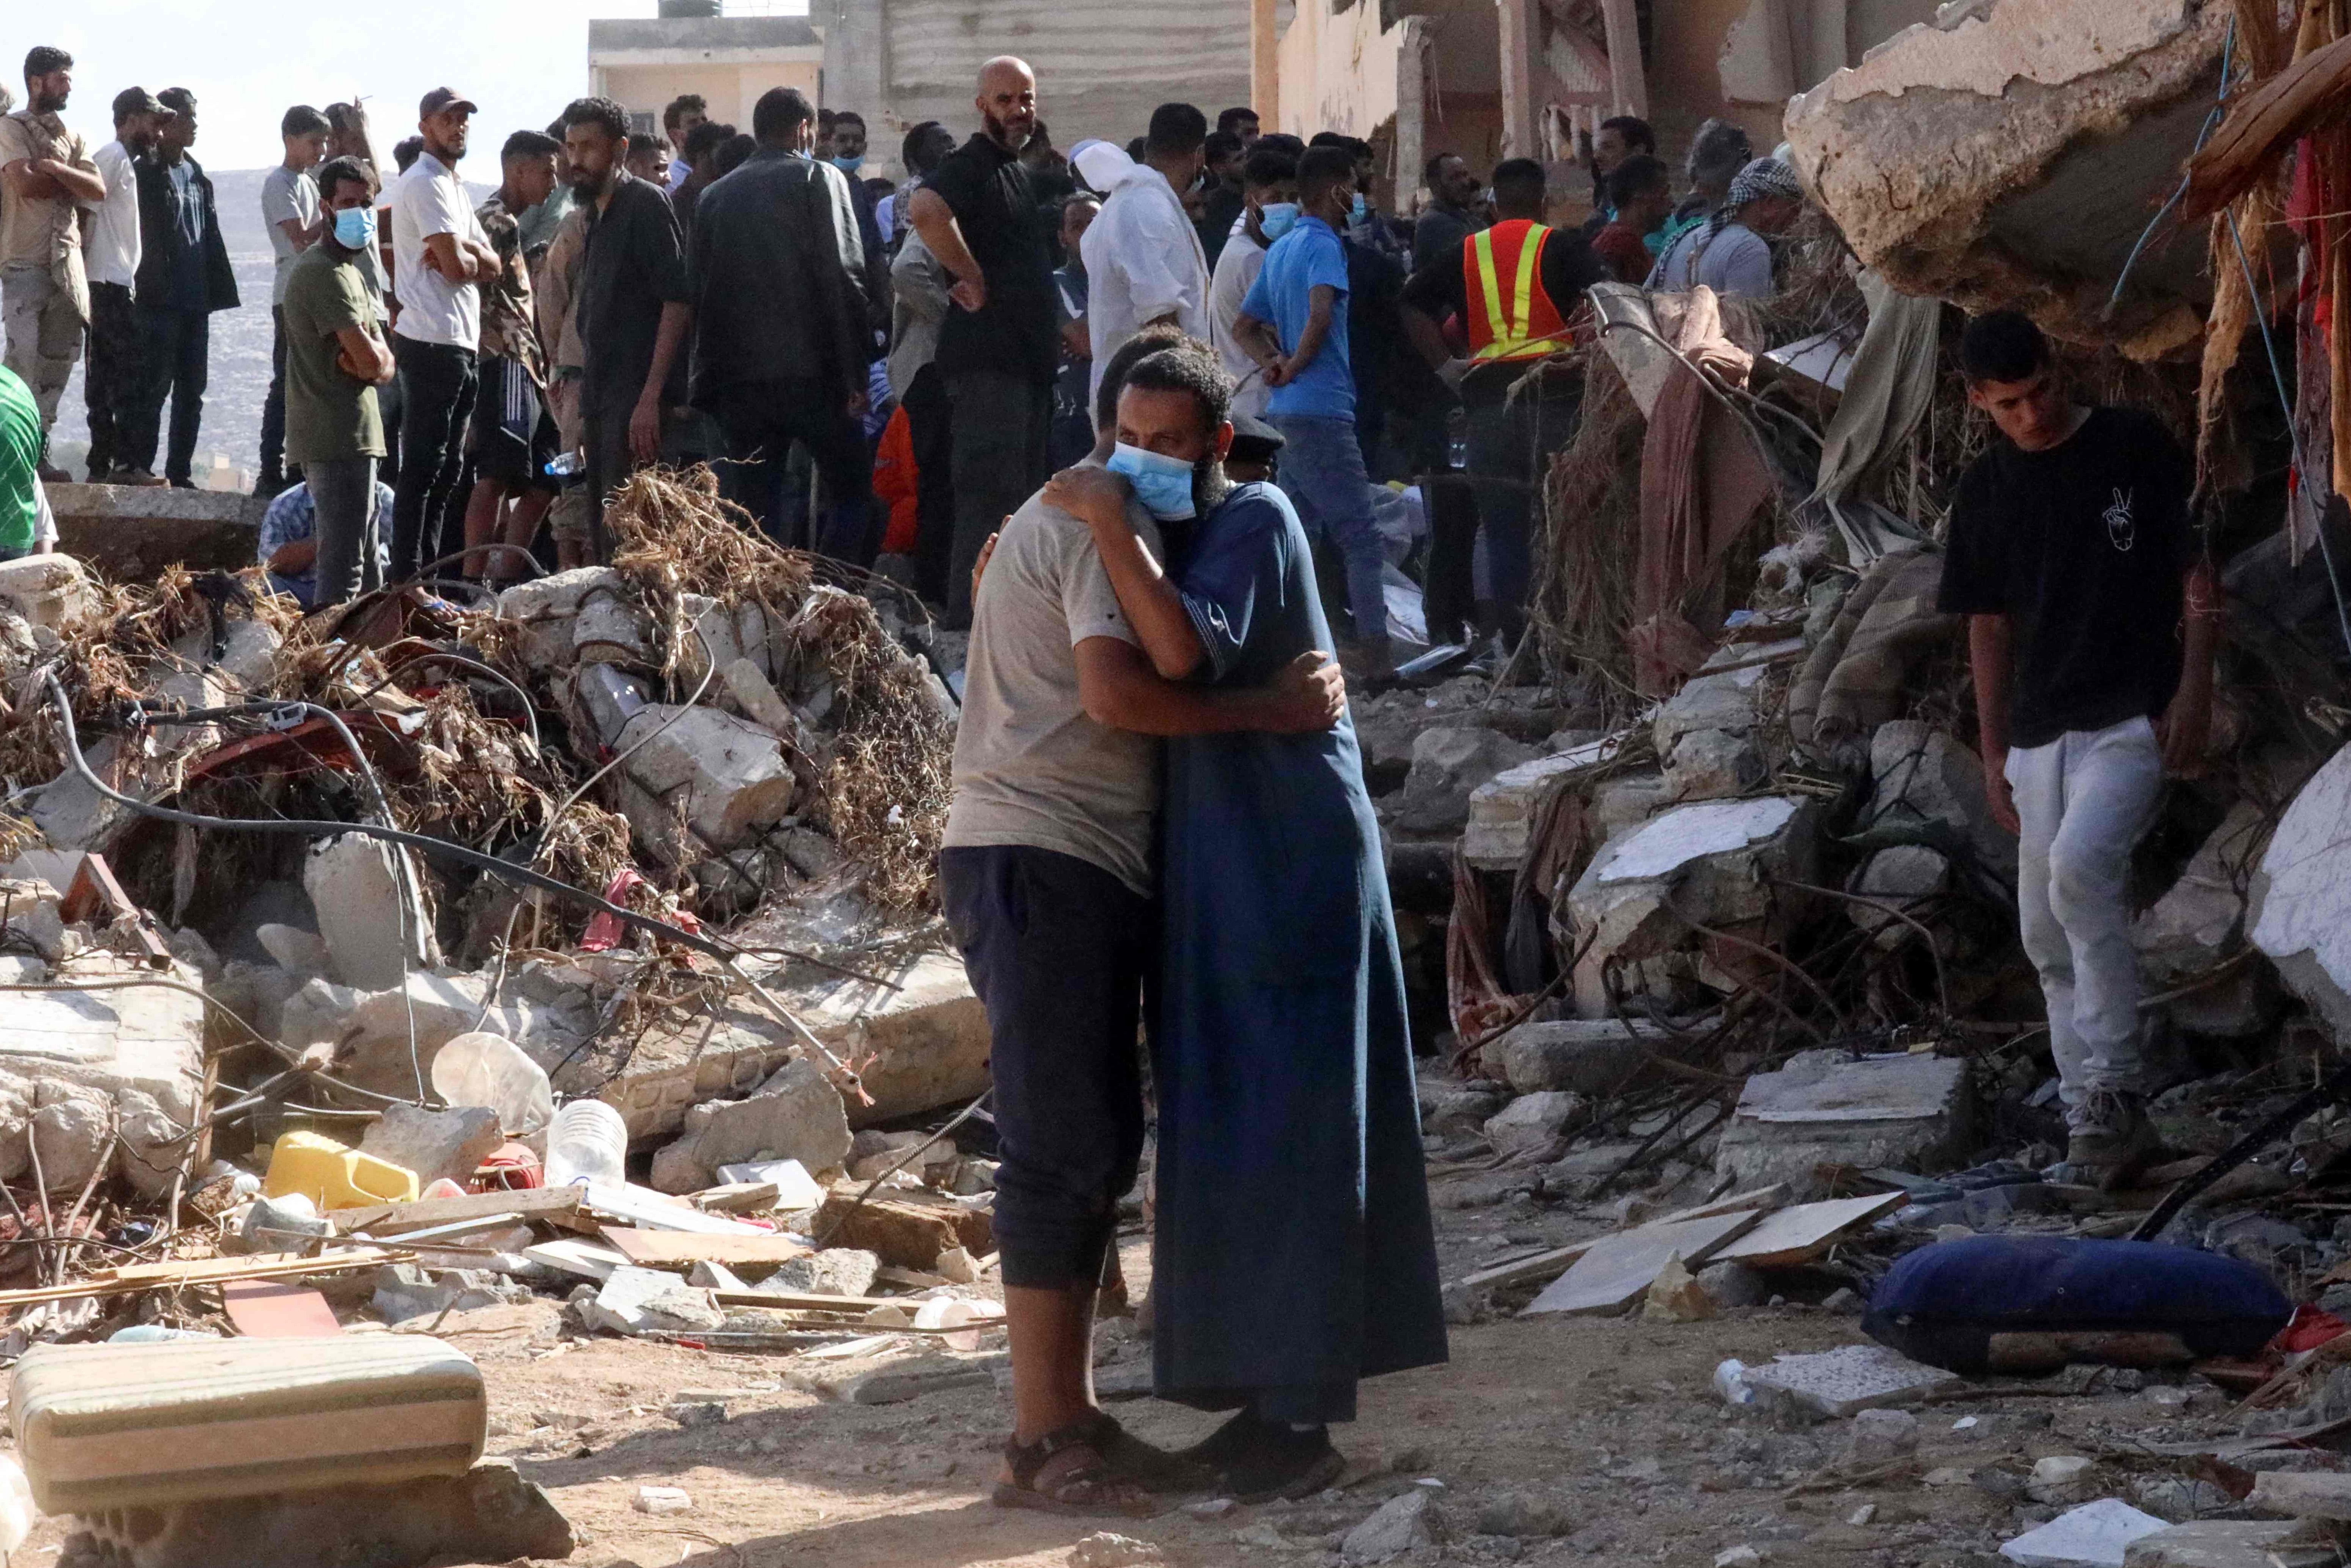 Two men comfort each other in the devastated Libyan city of Derna